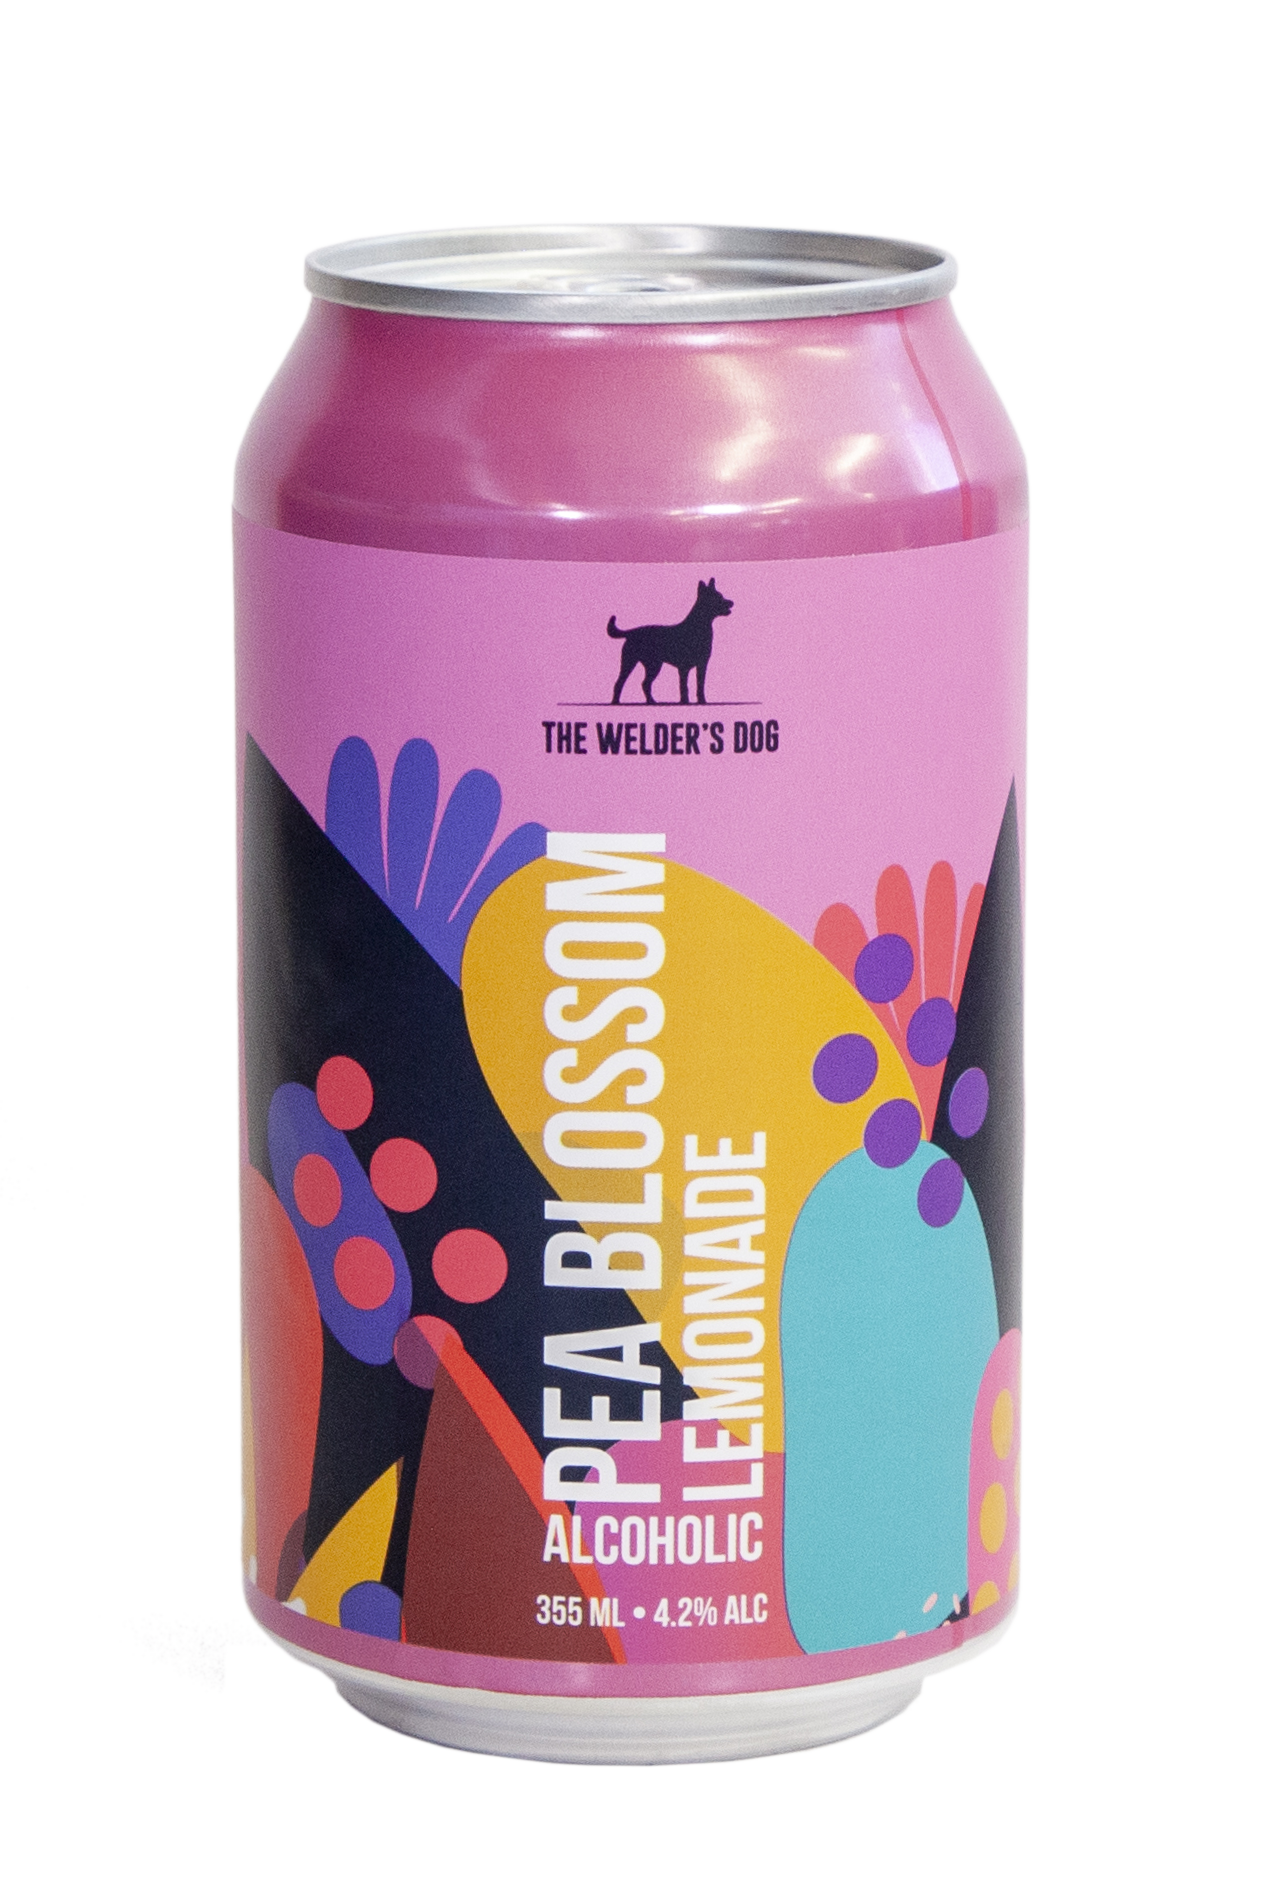 Pea Blossom Lemonade x 1 can by The Welder's Dog